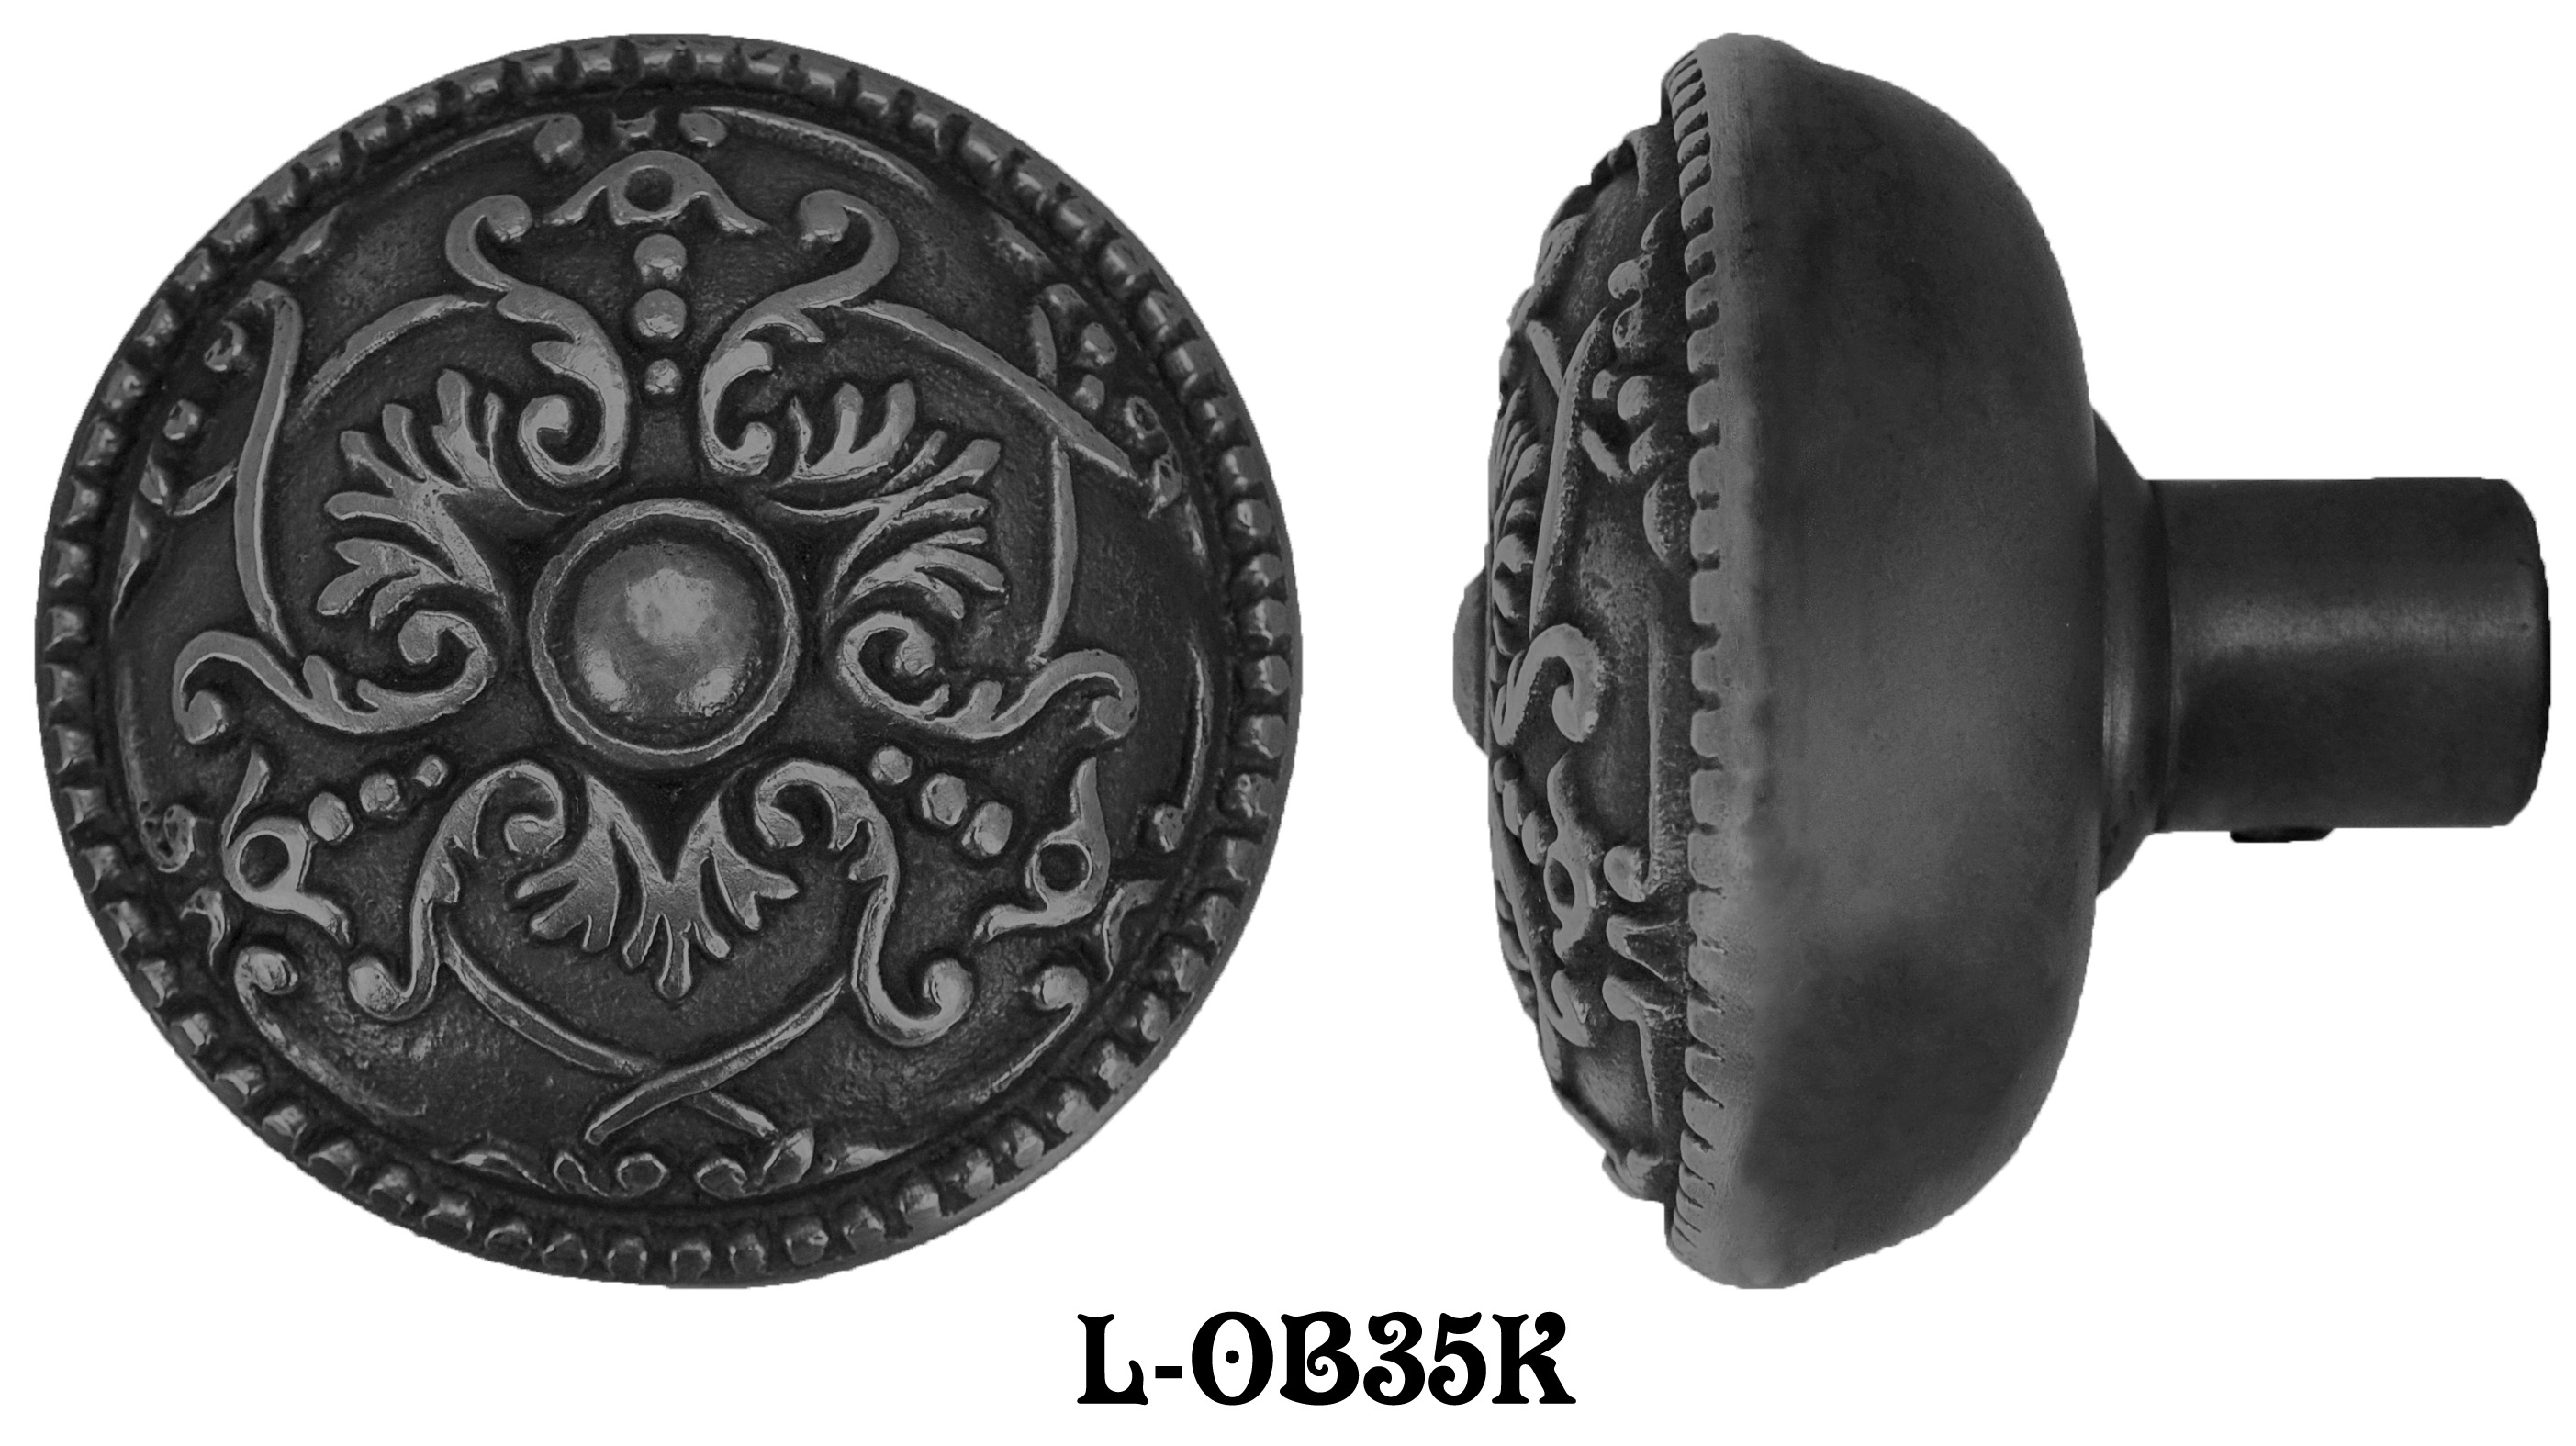 Victorian Style Scroll Design Oval Knobs Pair 